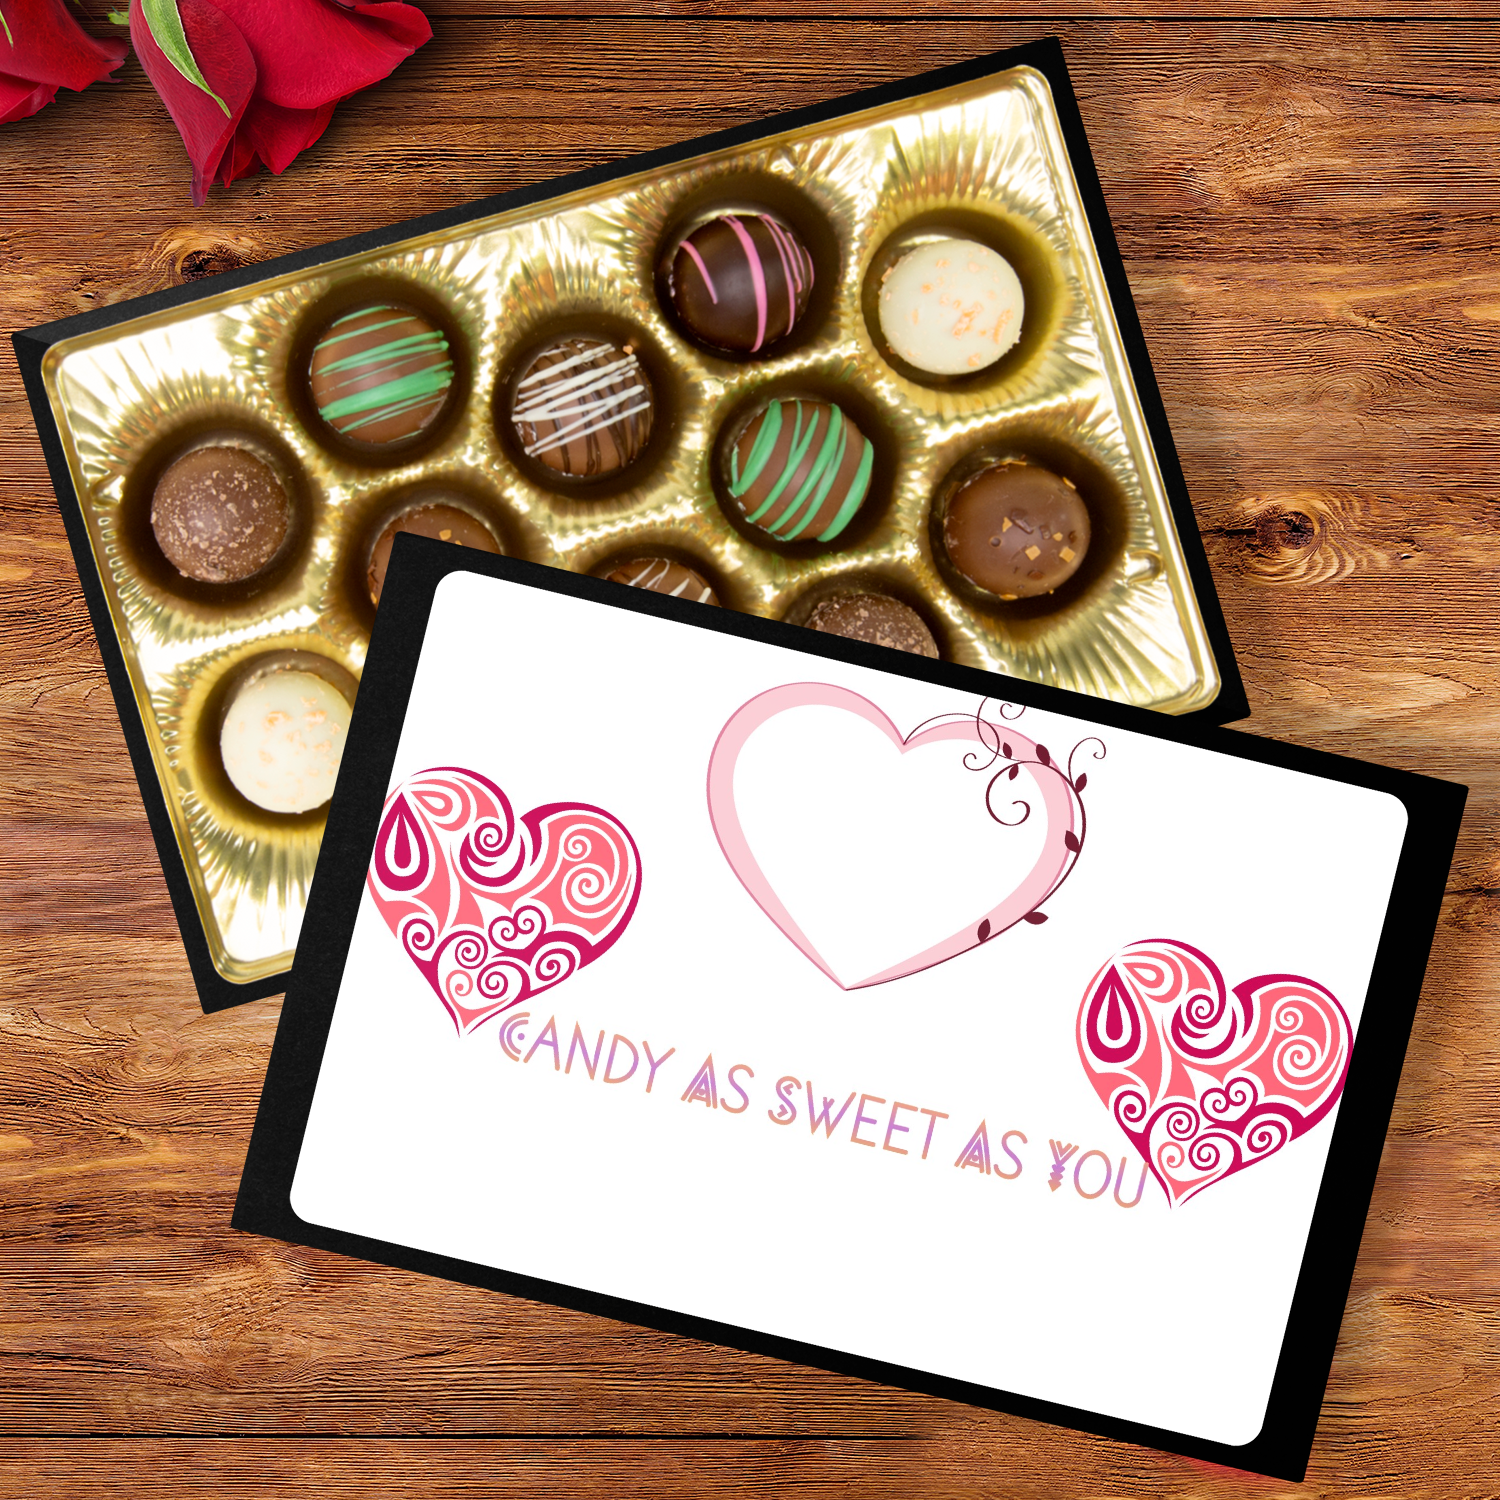 - Sweet As You Handmade Artisan Chocolate Truffle 12 count Gift Box - Ships from The US- Ships from The US - Chocolate Truffle Gift Box at TFC&H Co.